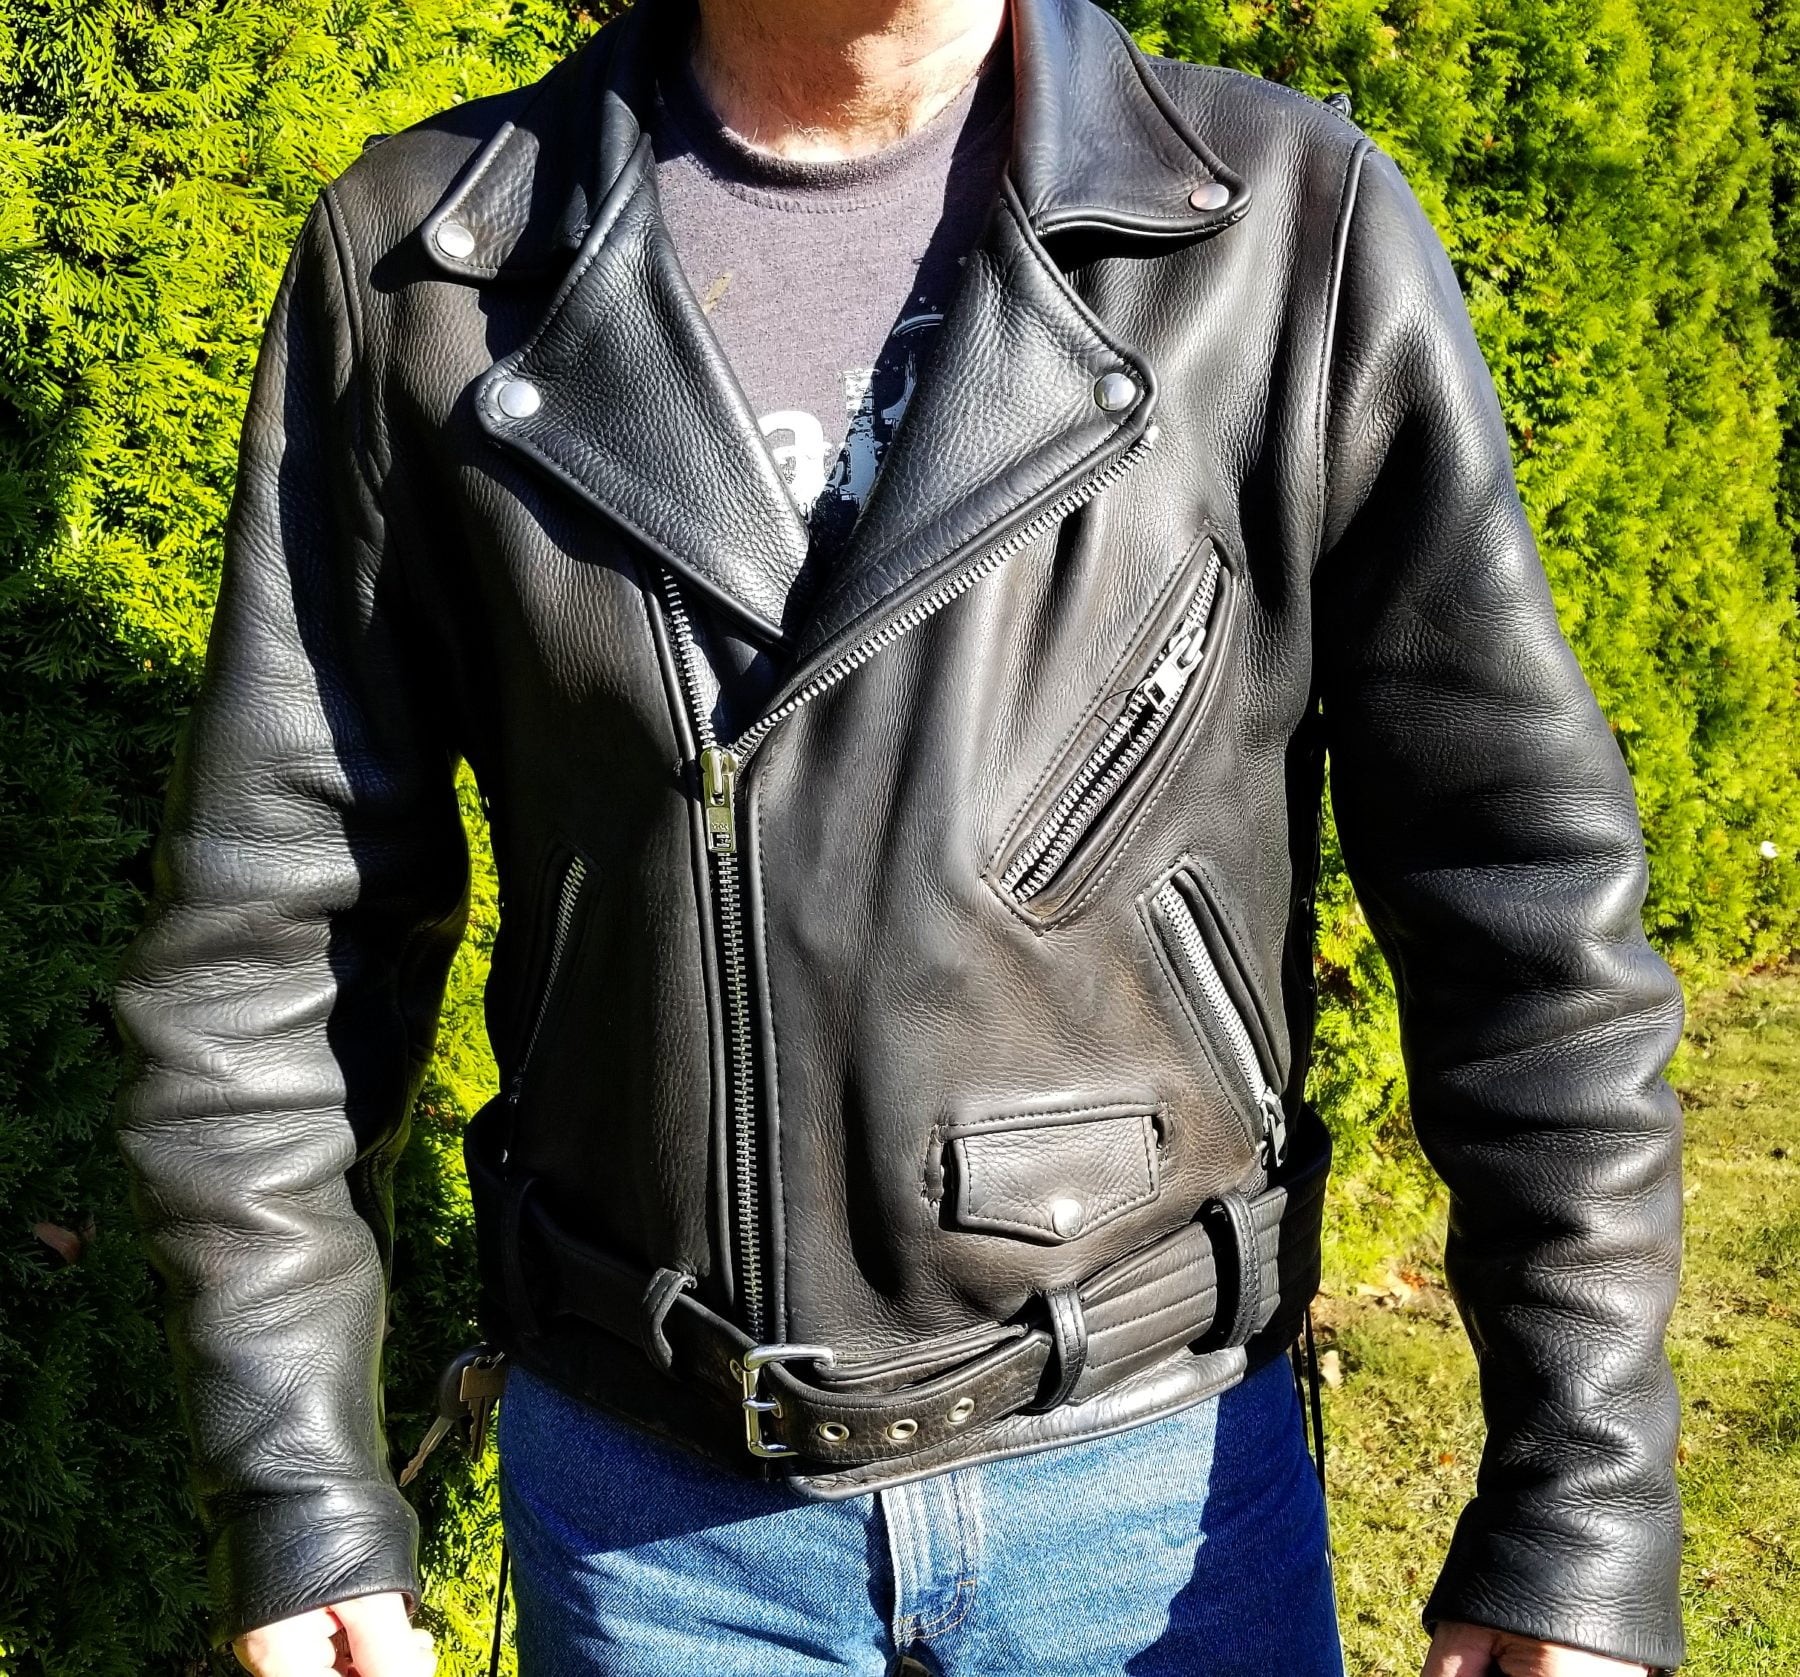 The Heavy Leather Jacket